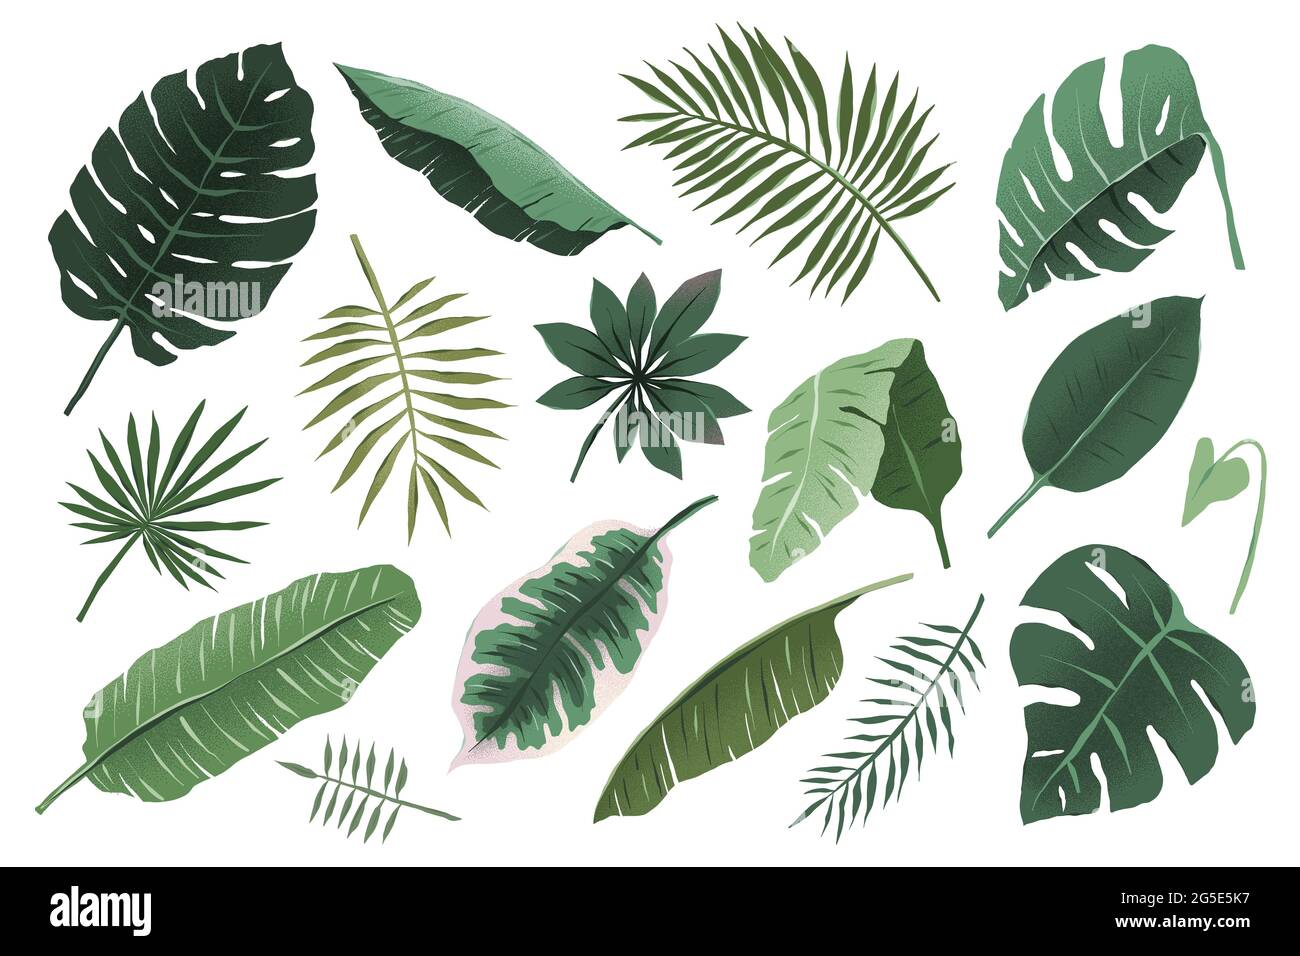 Tropical leaves collection, monstera plant branch and fan palm leaf, various hand drawn exotic foliage illustration, trendy tropic greenery, isolated Stock Vector